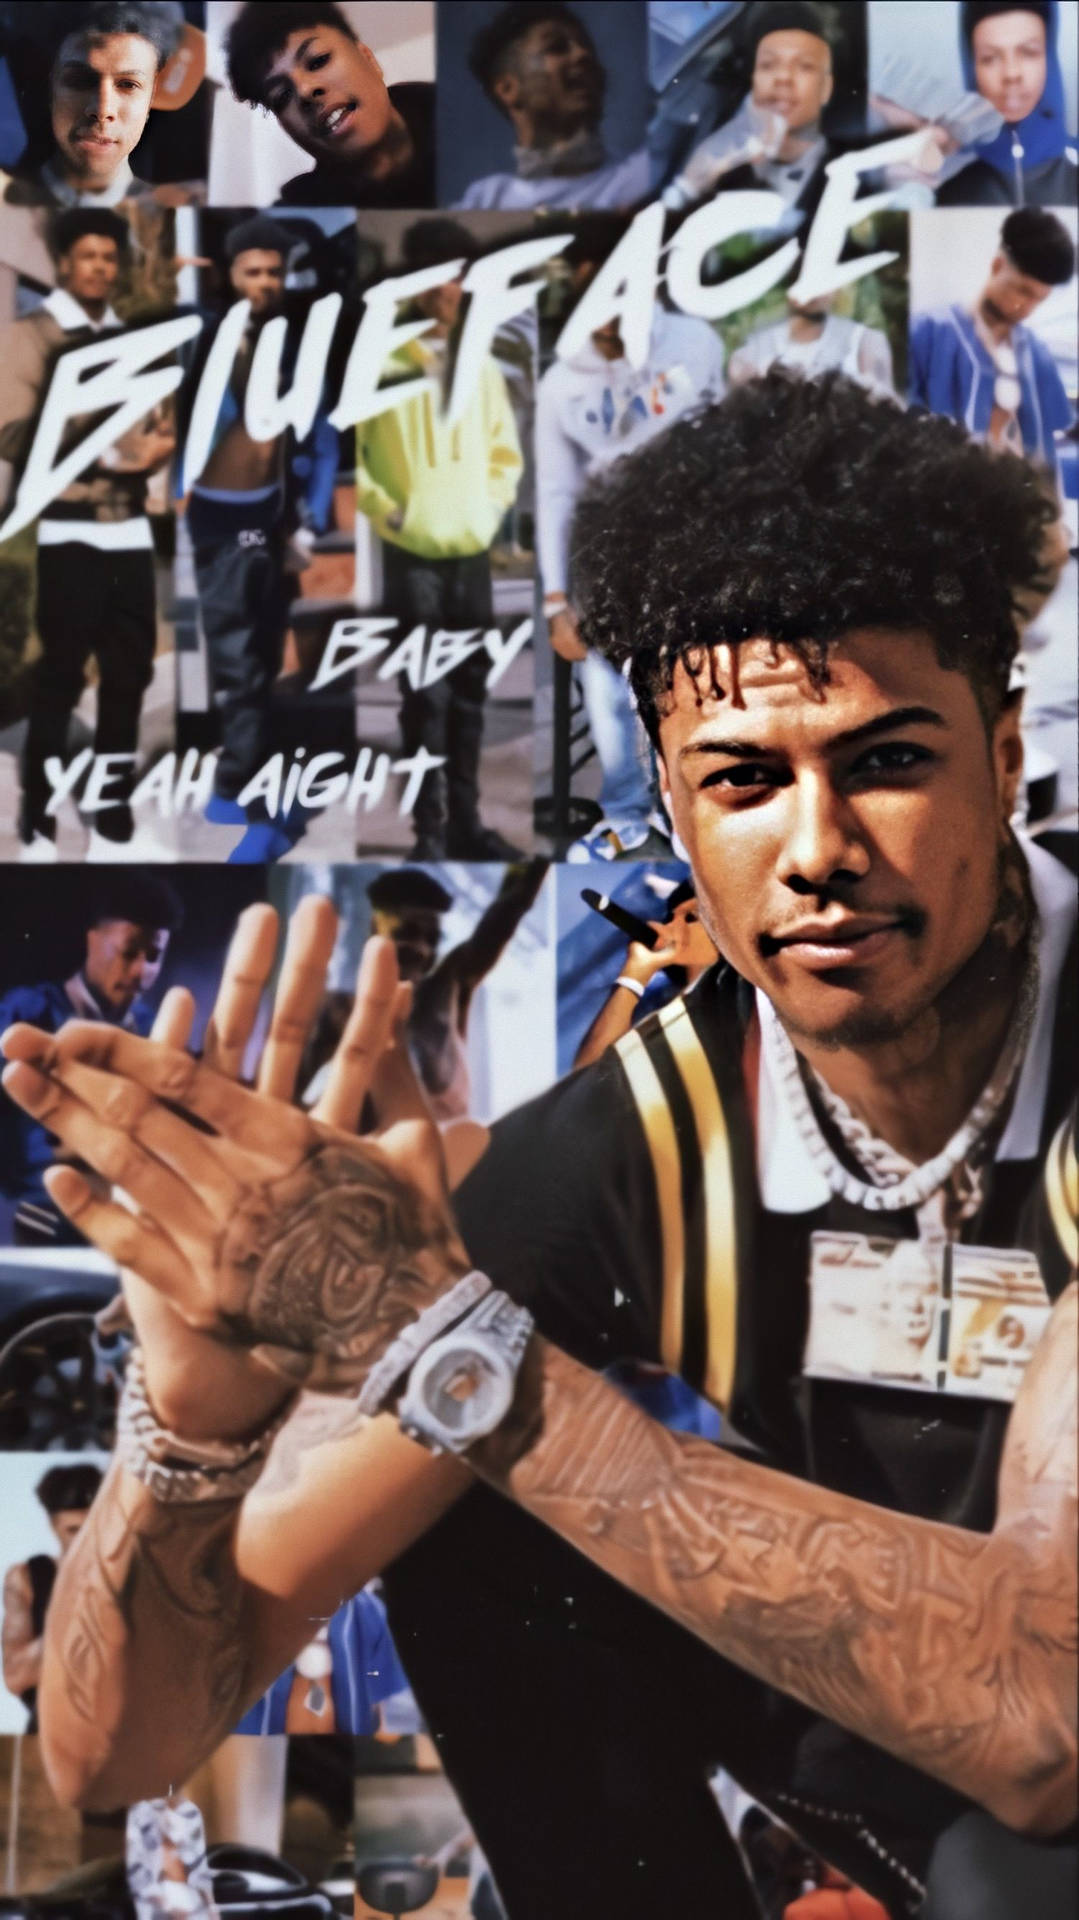 Blueface Baby Yeah Aight Wallpaper